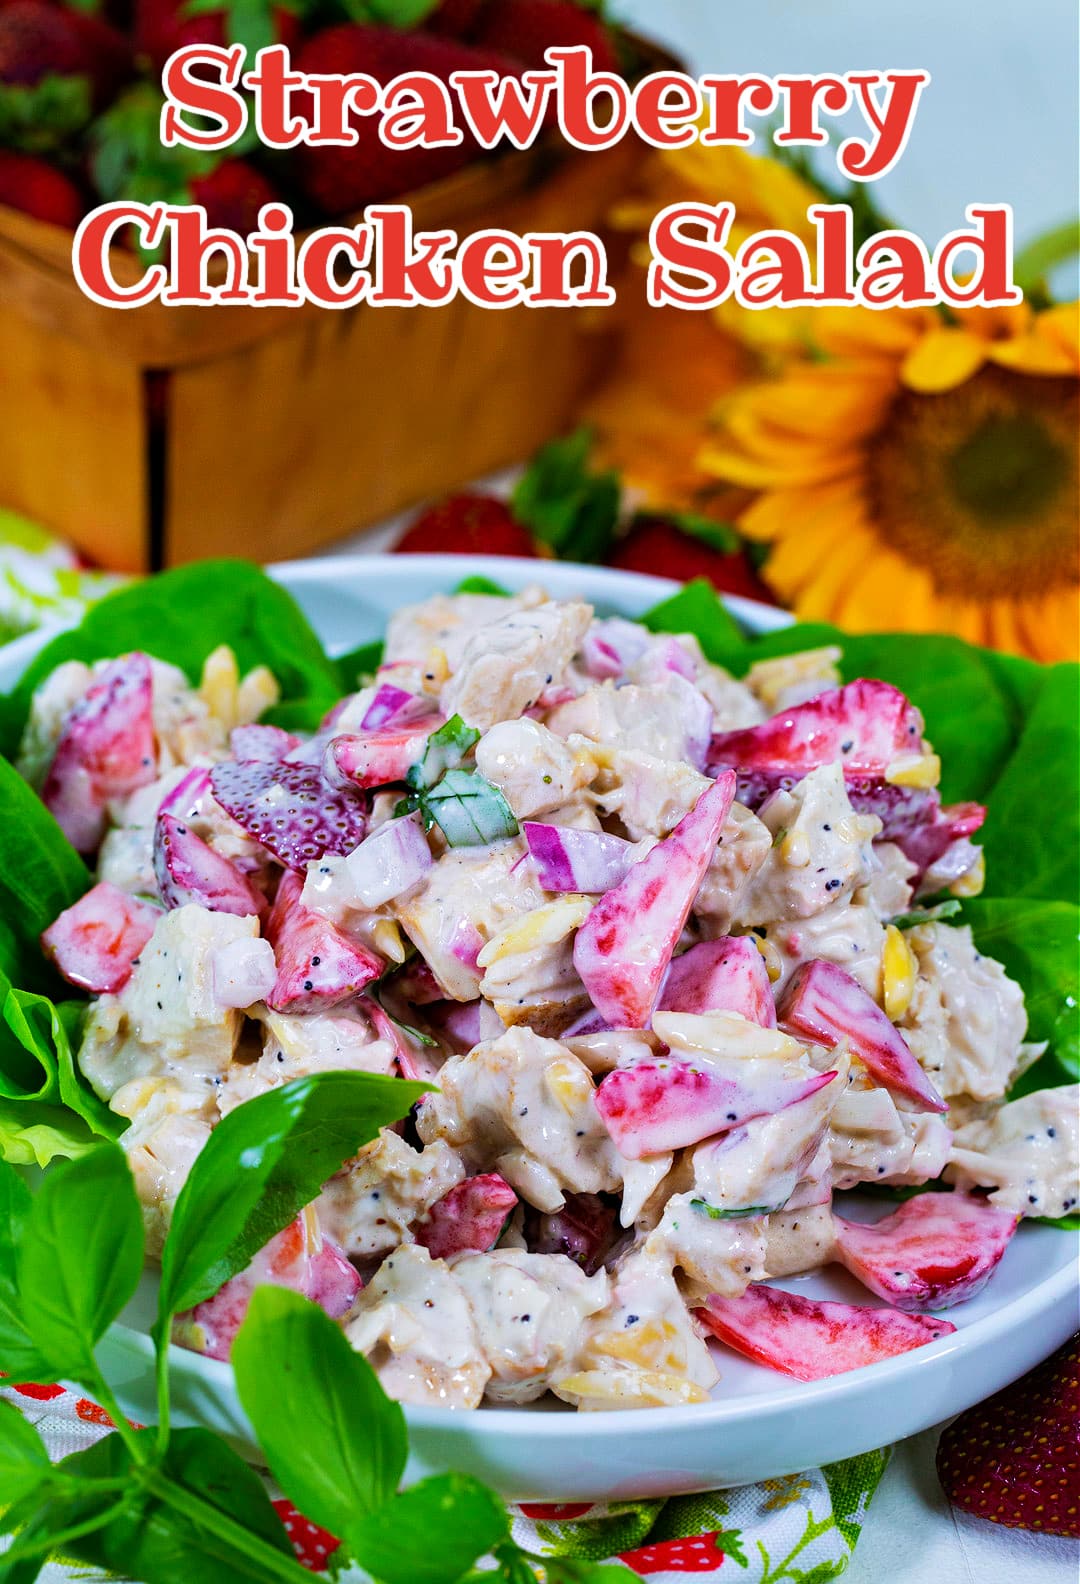 Chicken Salad with Strawberries connected  a furniture  of lettuce